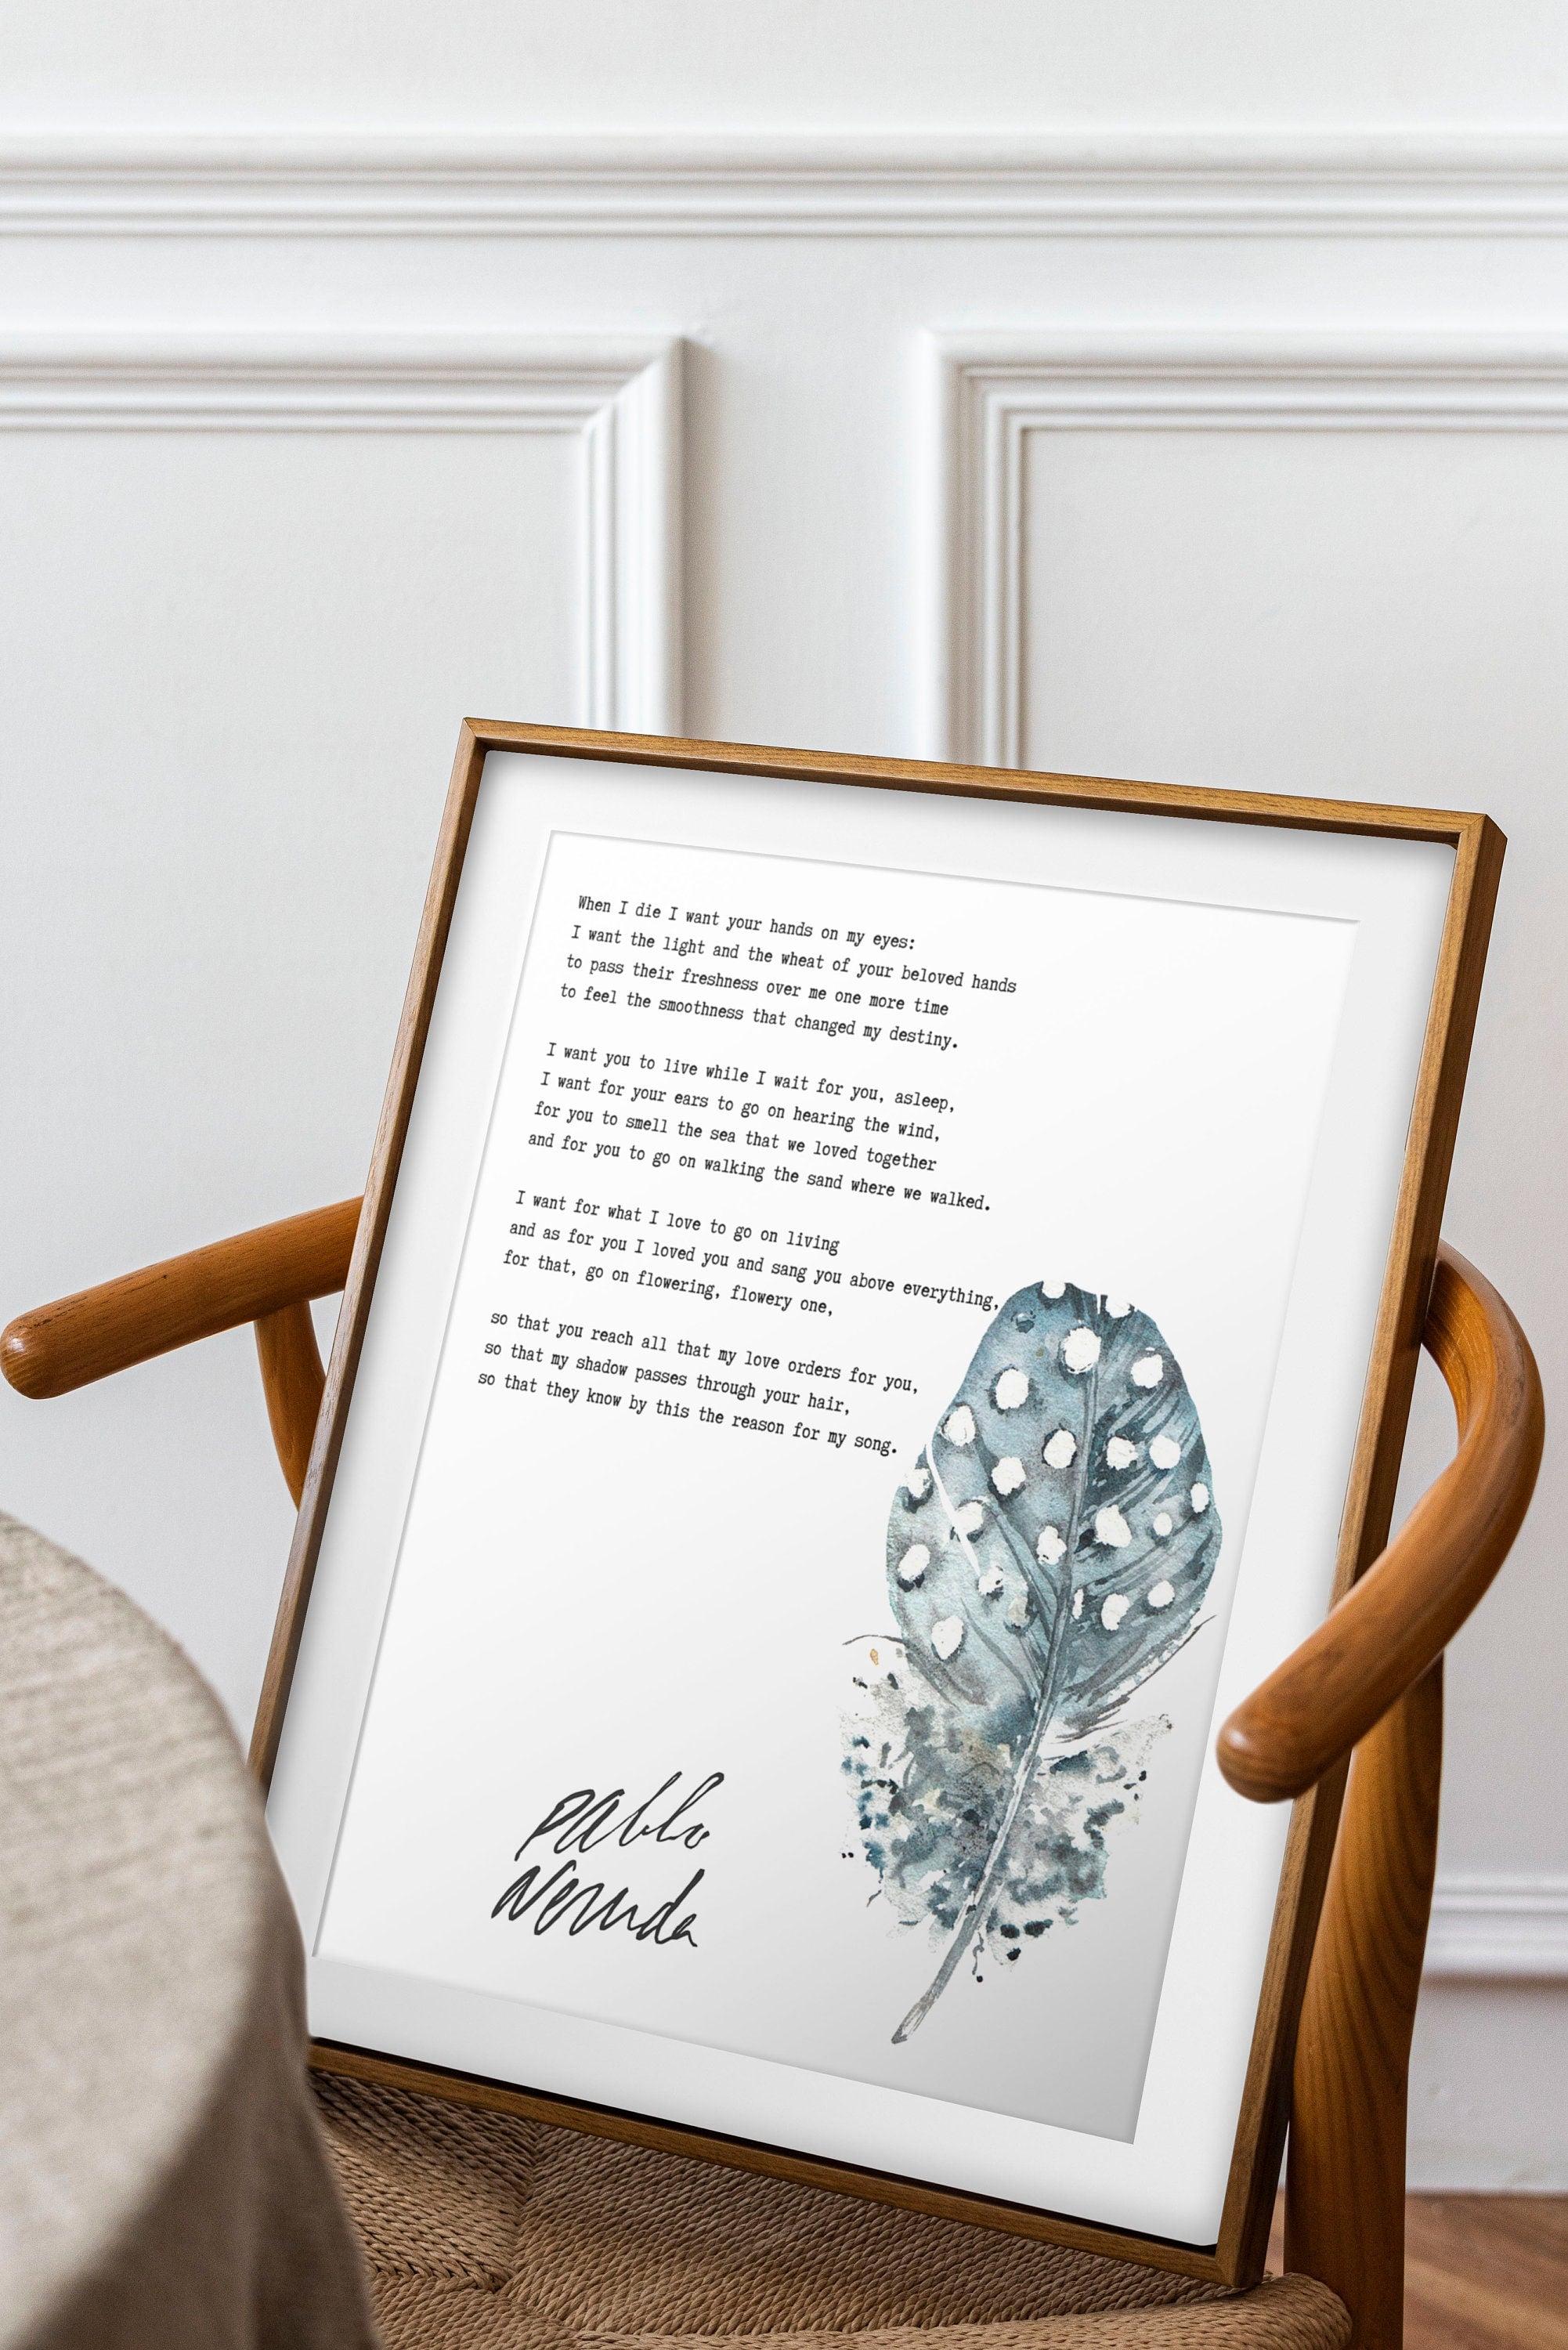 Pablo Neruda When I die I want your hands on my eyes, Unframed or Framed Poem Print in Black & White with Watercolour Feather Wall Art Decor